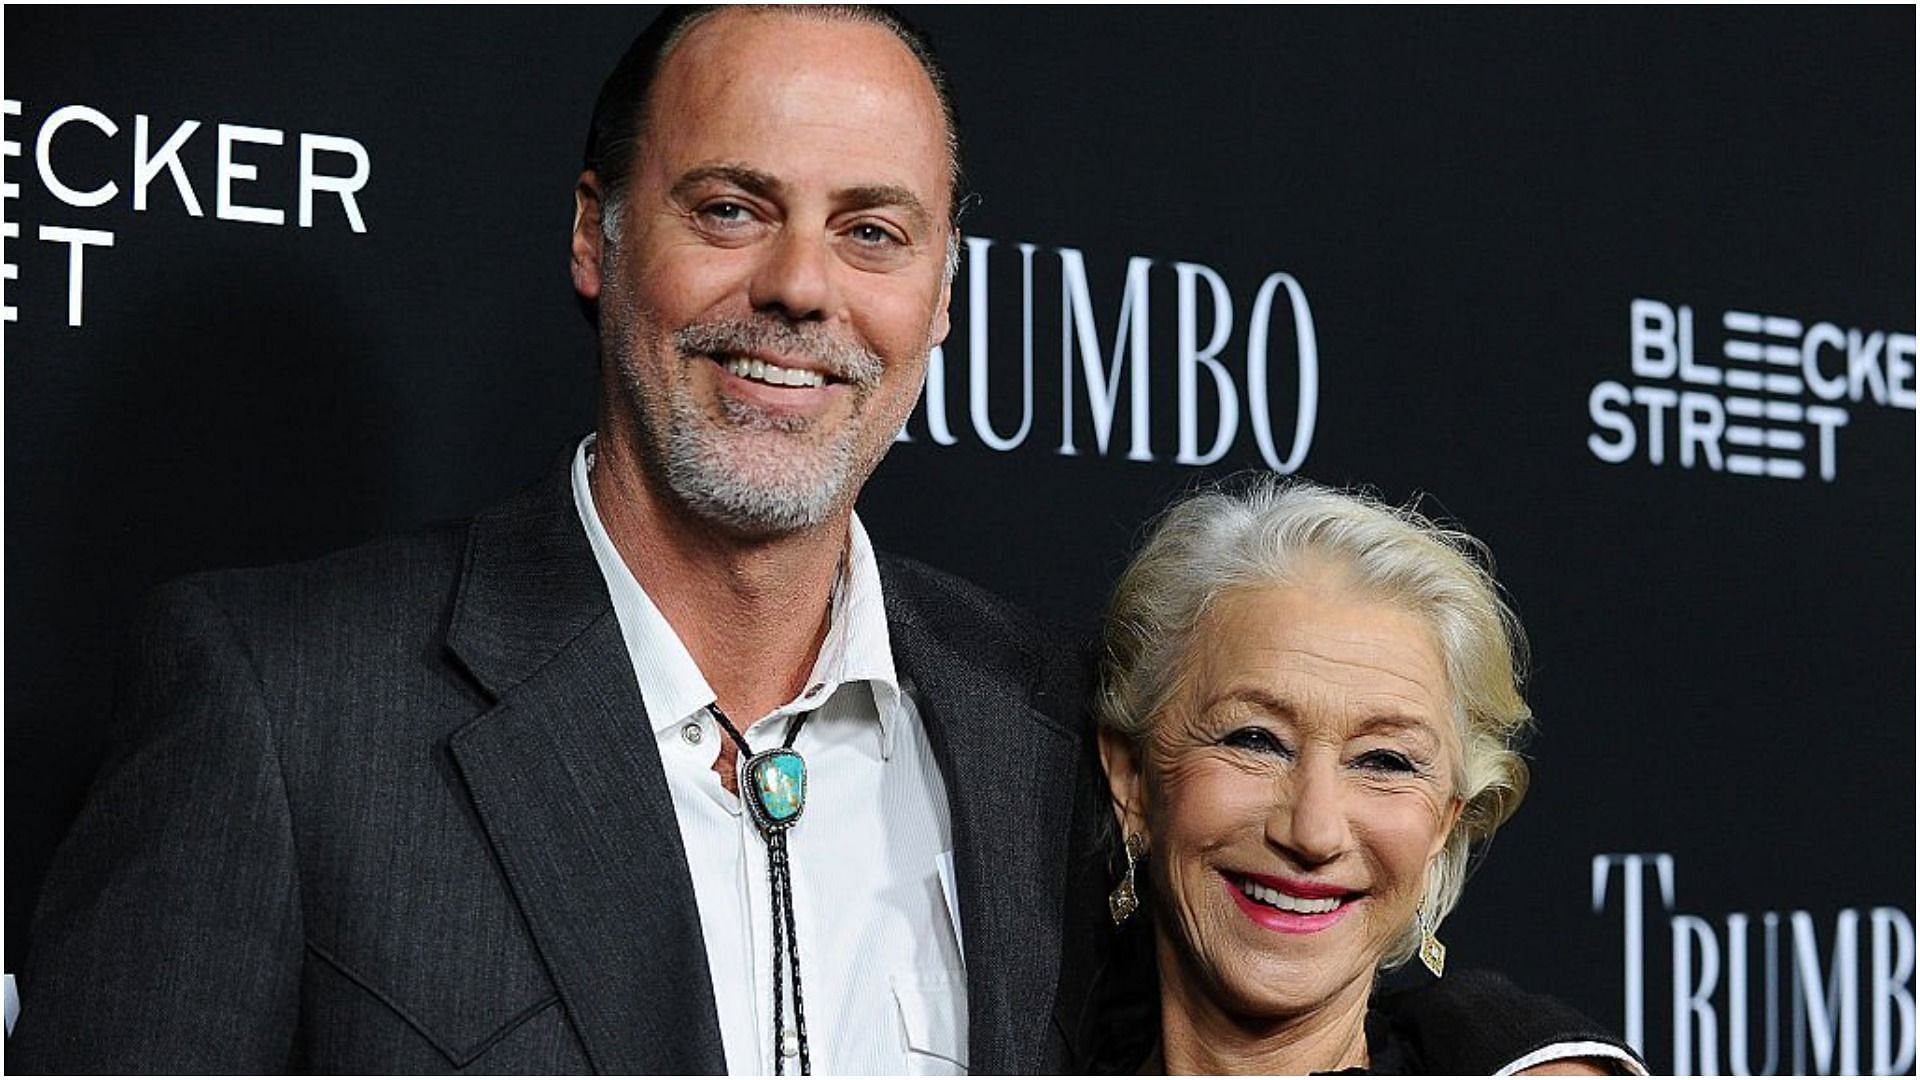 Rio Hackford with his stepmother Helen Mirren (Image via Jason LaVeris/Getty Images)